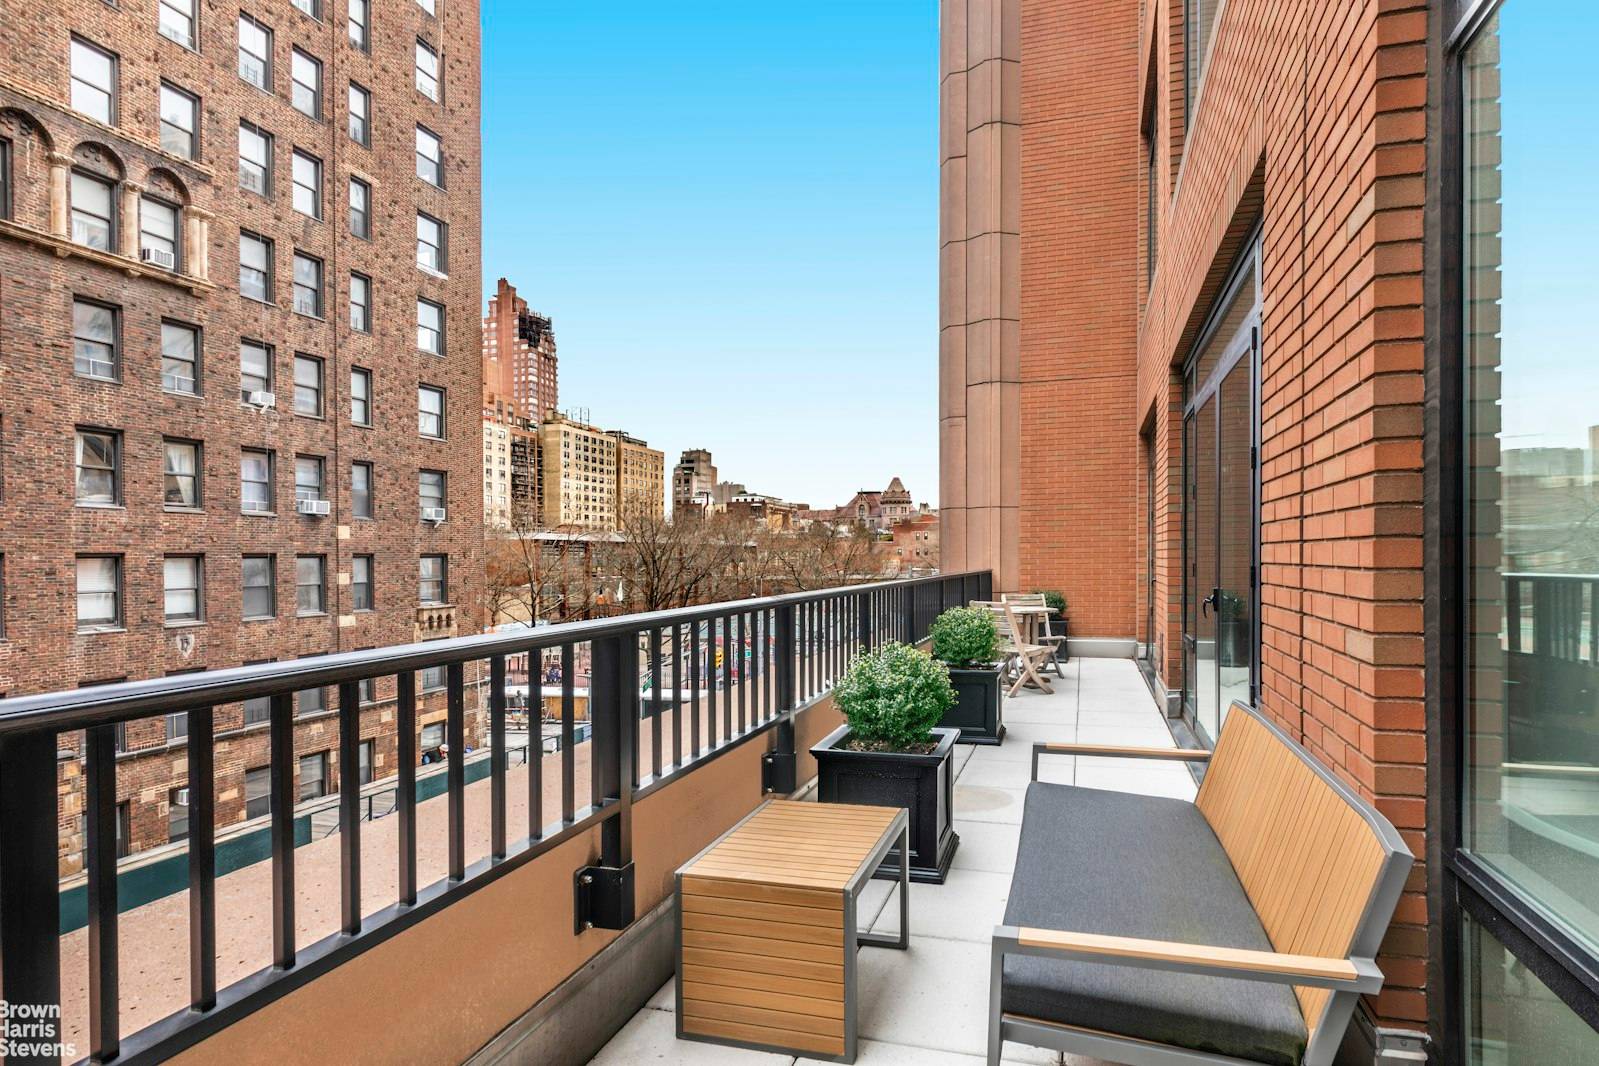 PRIVATE OUTDOOR SPACE ! Terrace lovers will enjoy this split two bedroom layout with the terrace running the full length of the apartment.